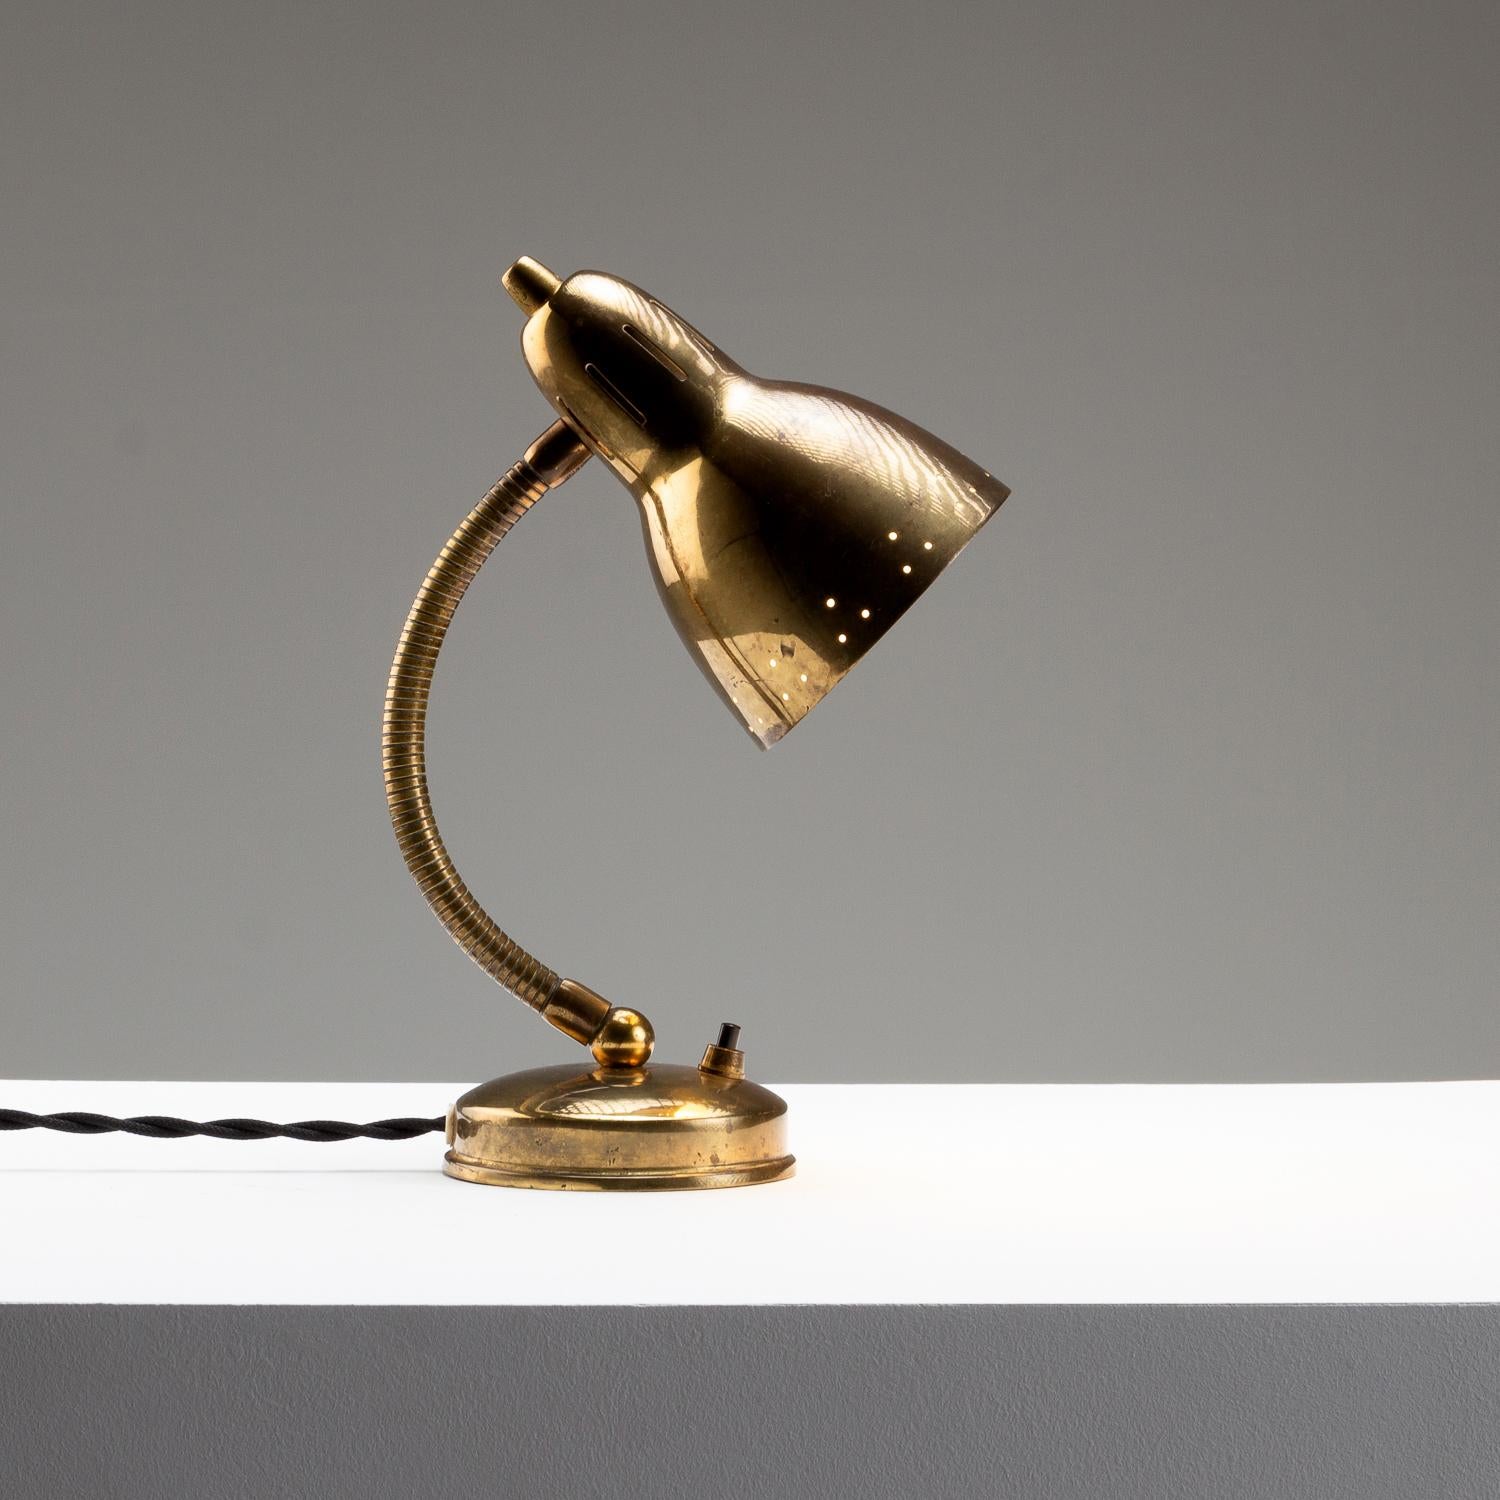 Brass gooseneck table lamp Model AJH5 designed by Hans-Agne Jakobsson for his eponymous furniture manufacturing company, Hans-Agne Jakobsson AB in Markaryd, Sweden, 1950s. Patinated brass. Rewired and PAT Tested.

